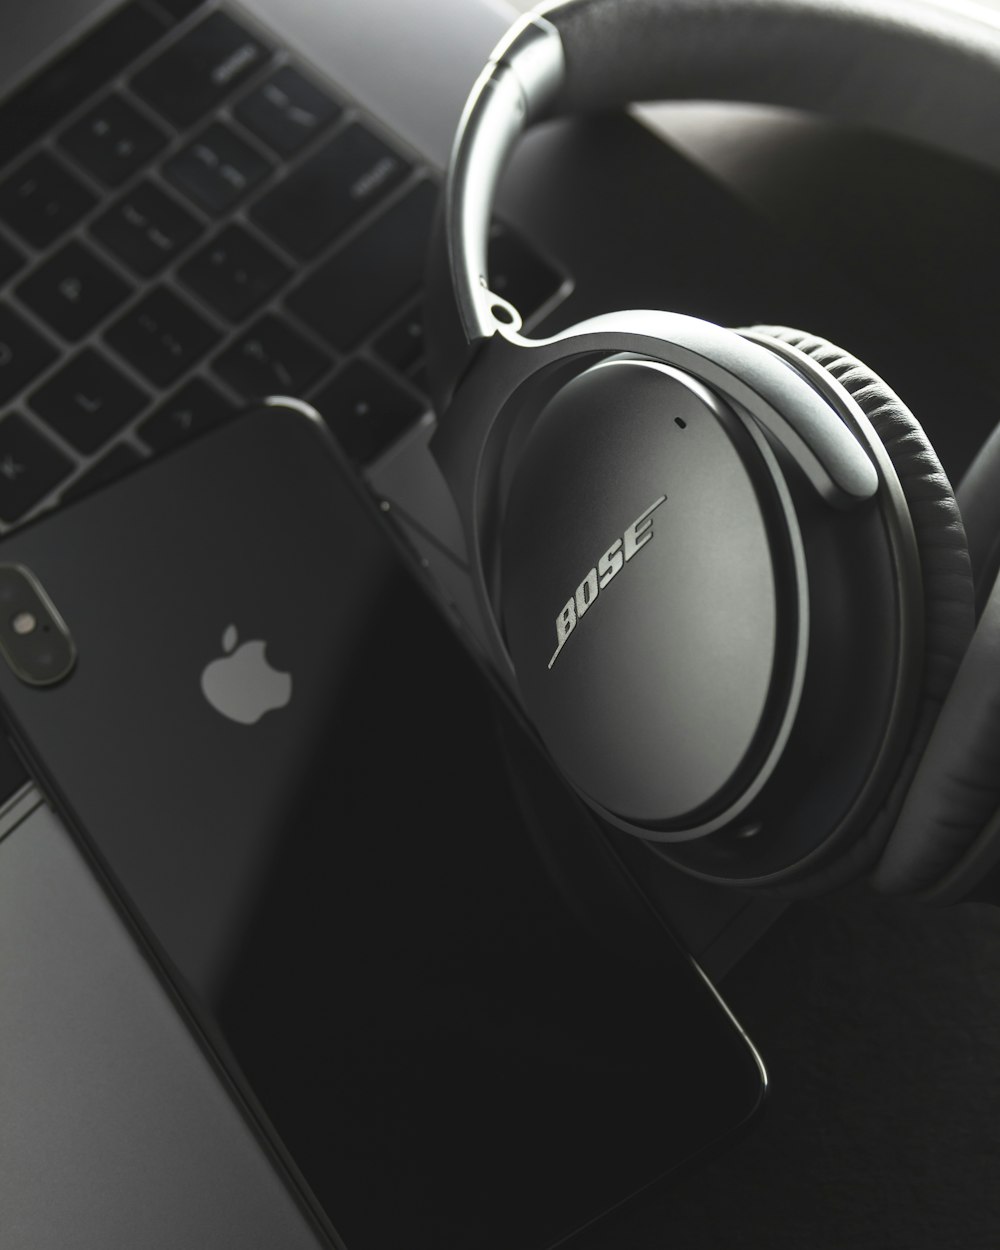 gray and black Bose headset and black iPhone X